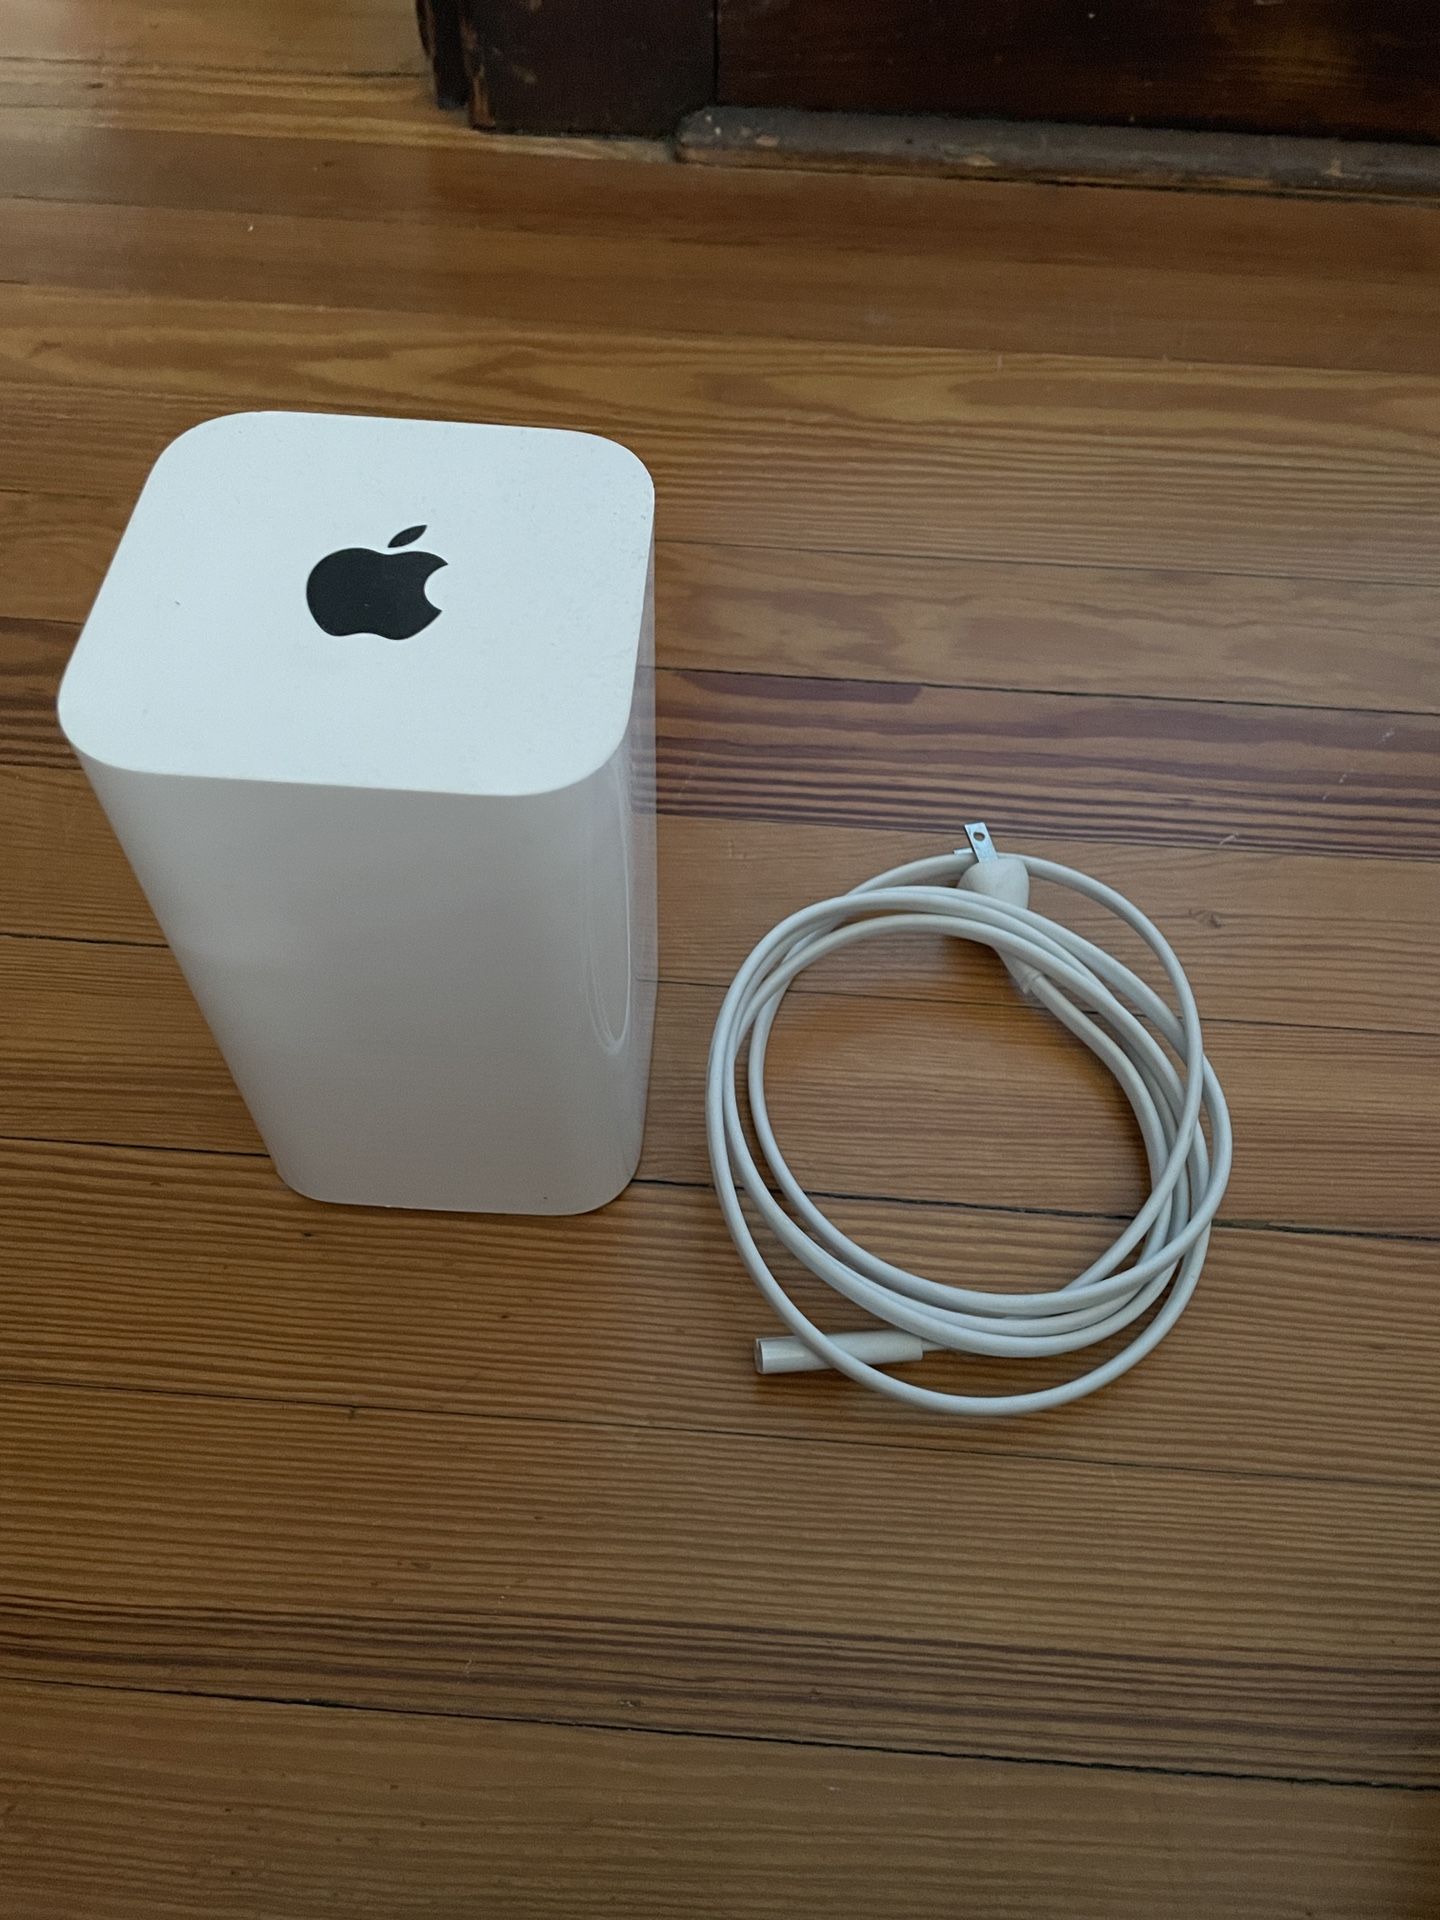 Apple Airport Extreme WiFi Router